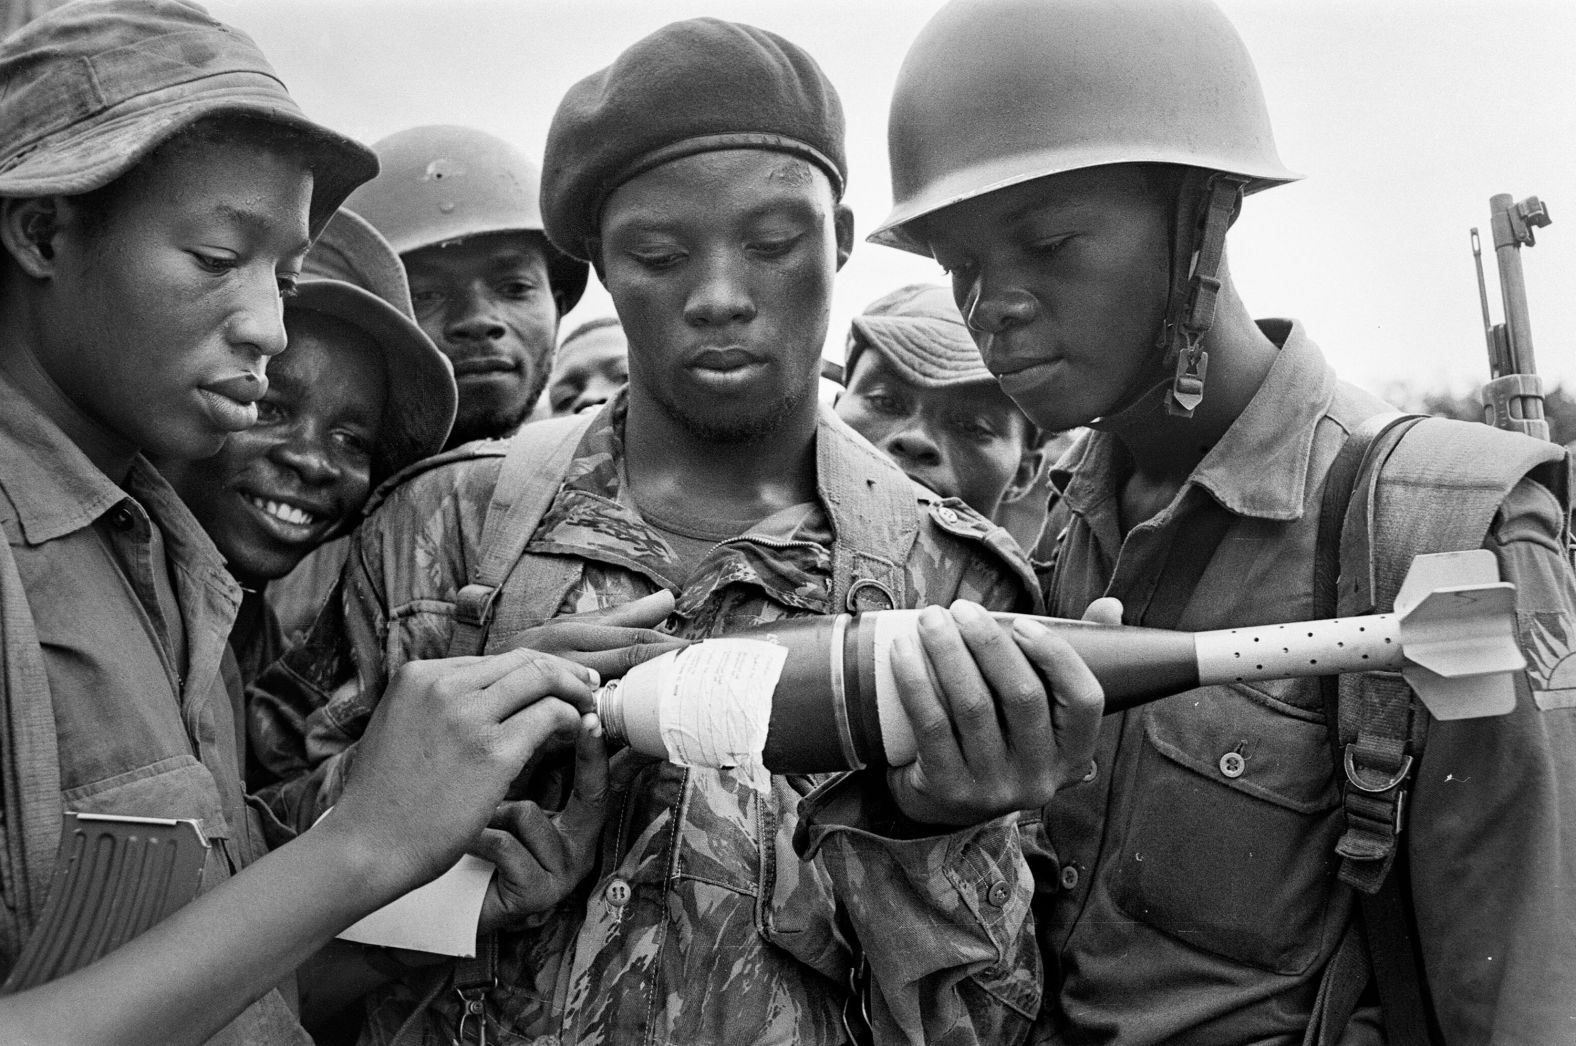 Young Biafran soldiers inspect an unexploded shell in June 1968.